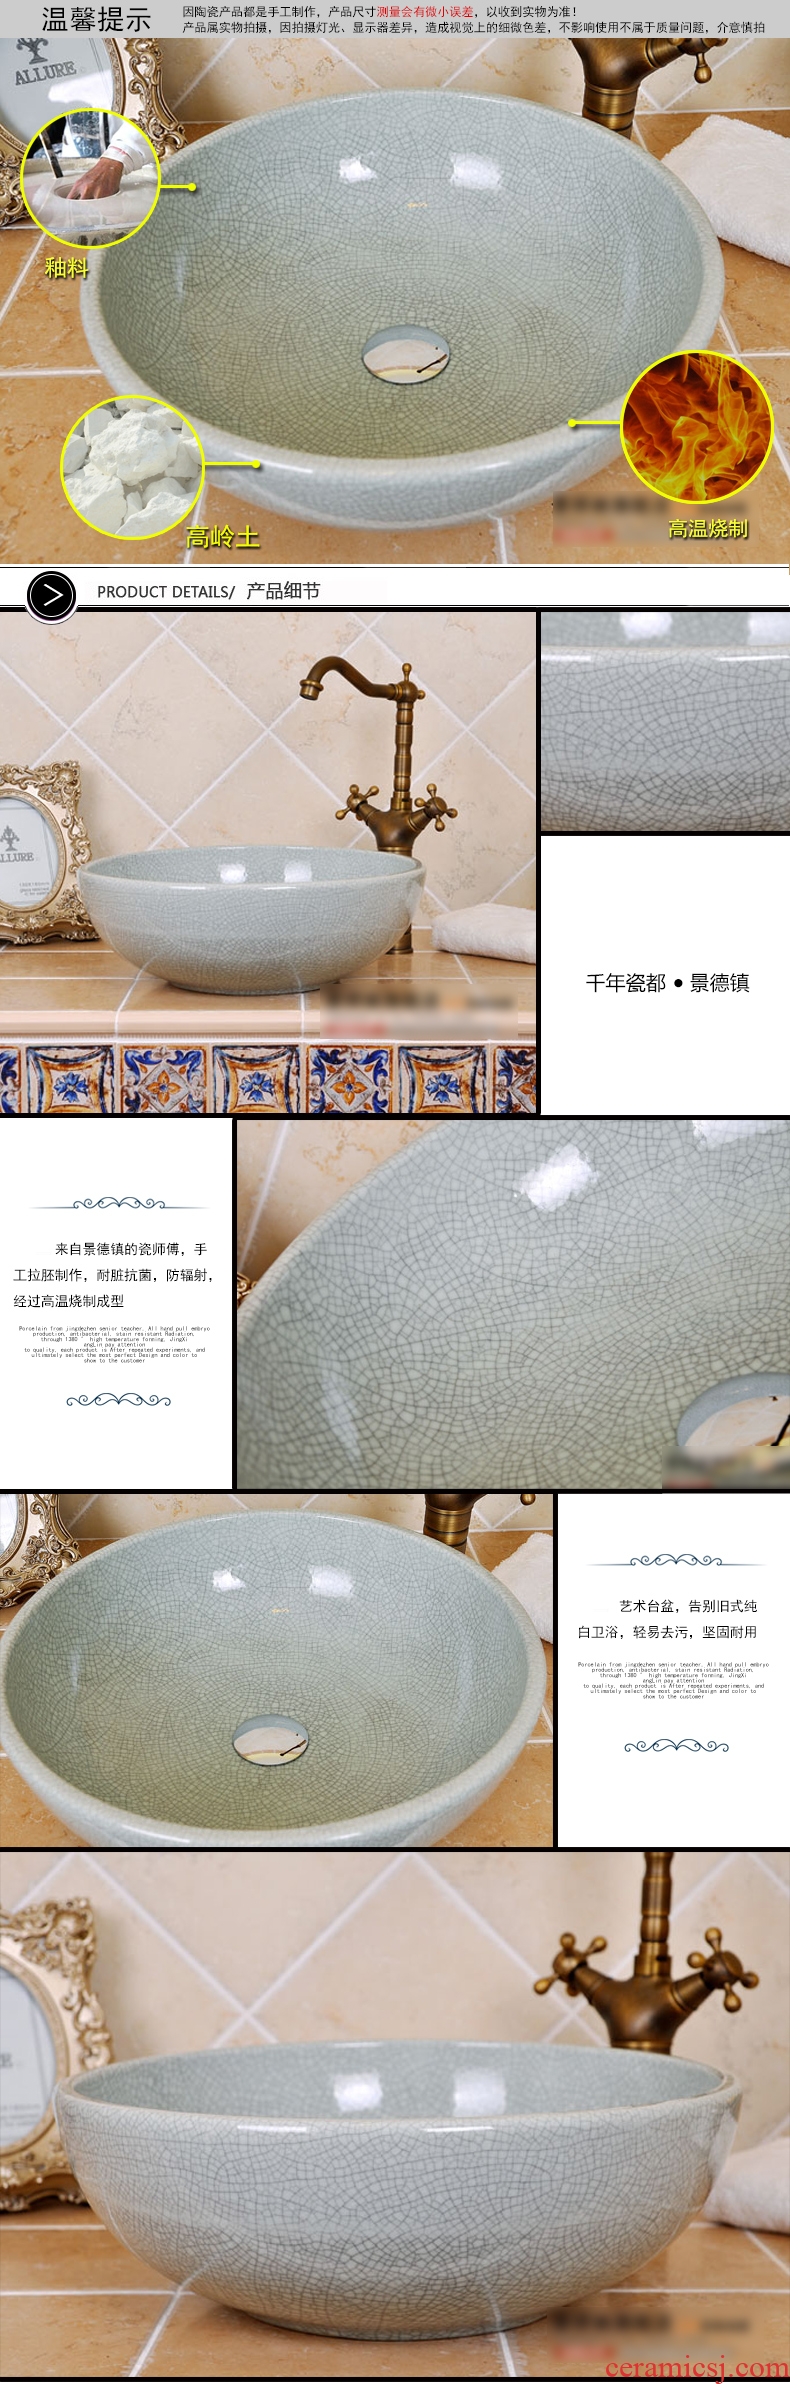 Lavatory art ceramic Europe type restoring ancient ways round contracted toilet stage basin basin sink basin on stage